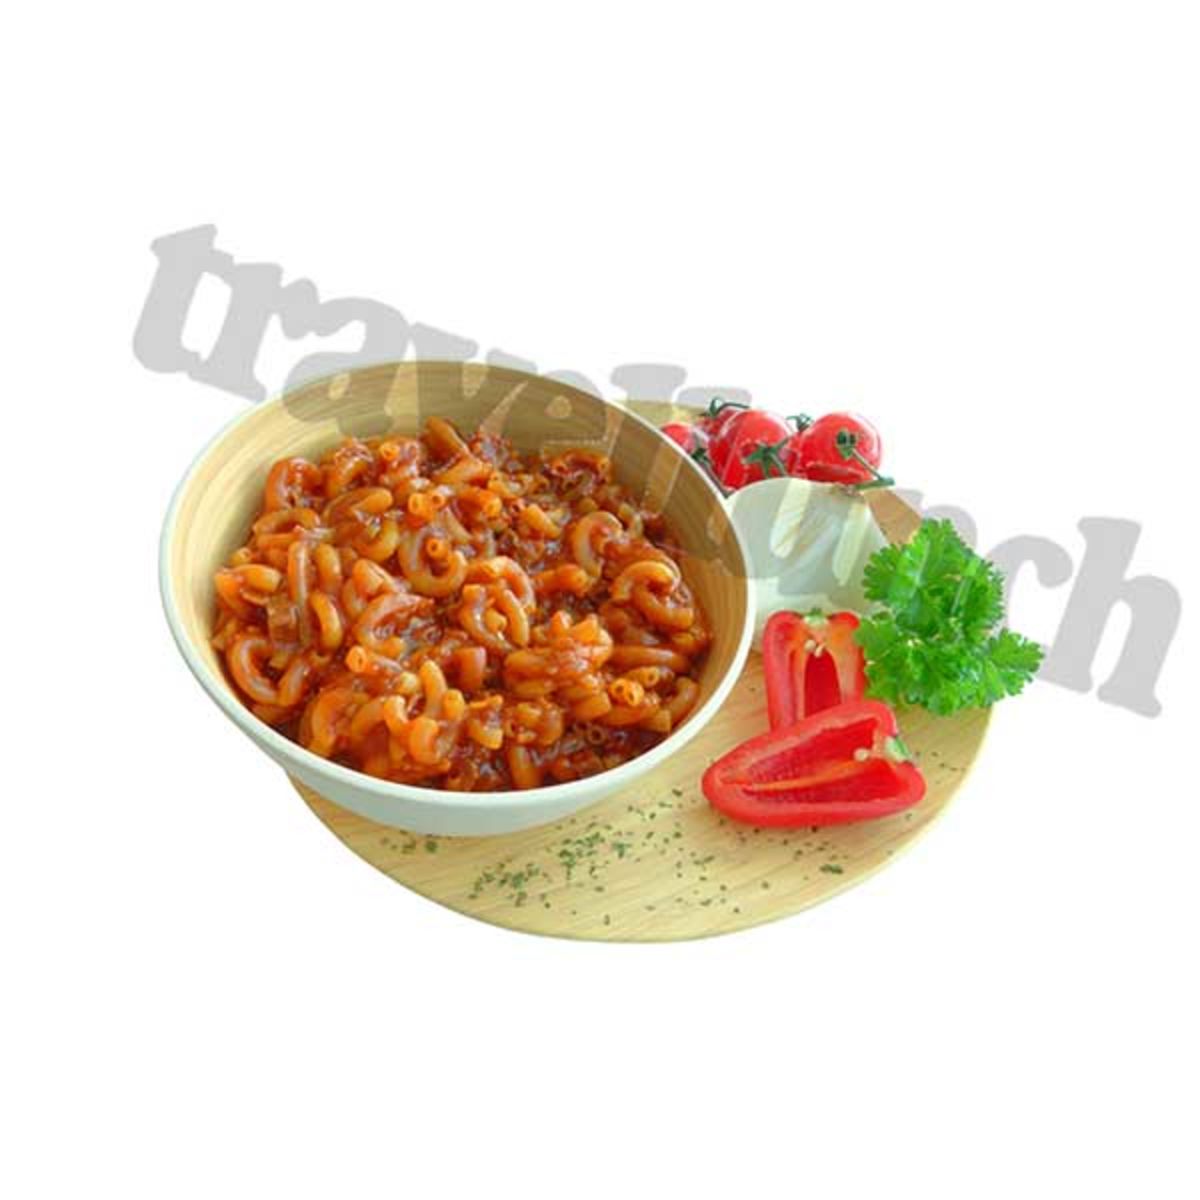 Pasta with beef and pepper sauce